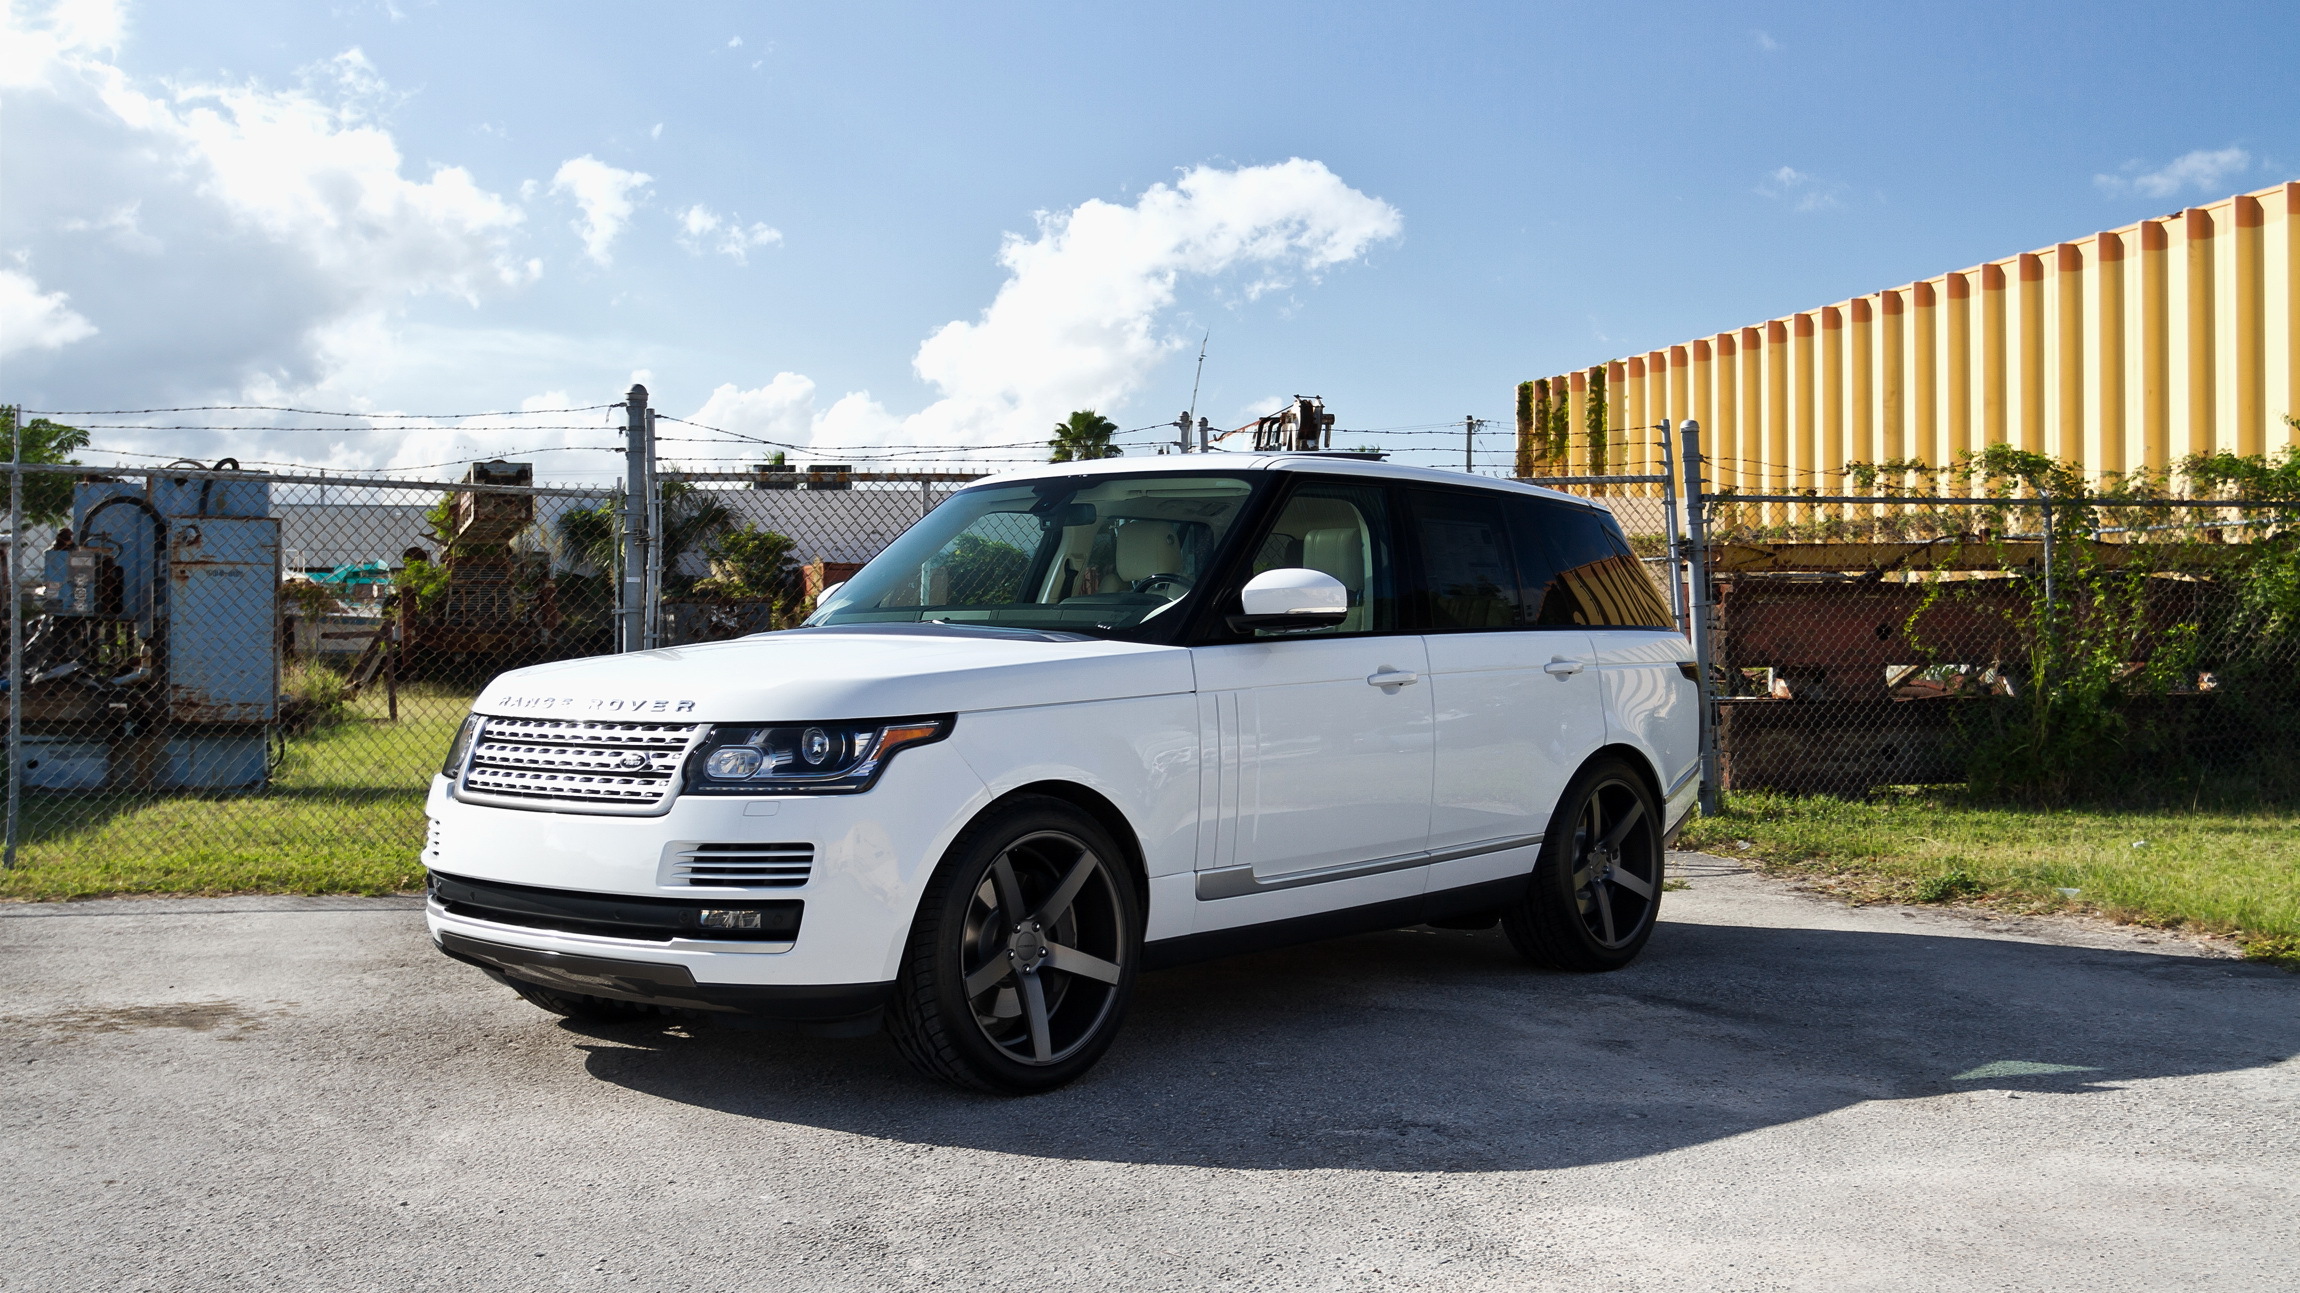 65216 download wallpaper sports, range rover, land rover, cars, white, jeep screensavers and pictures for free